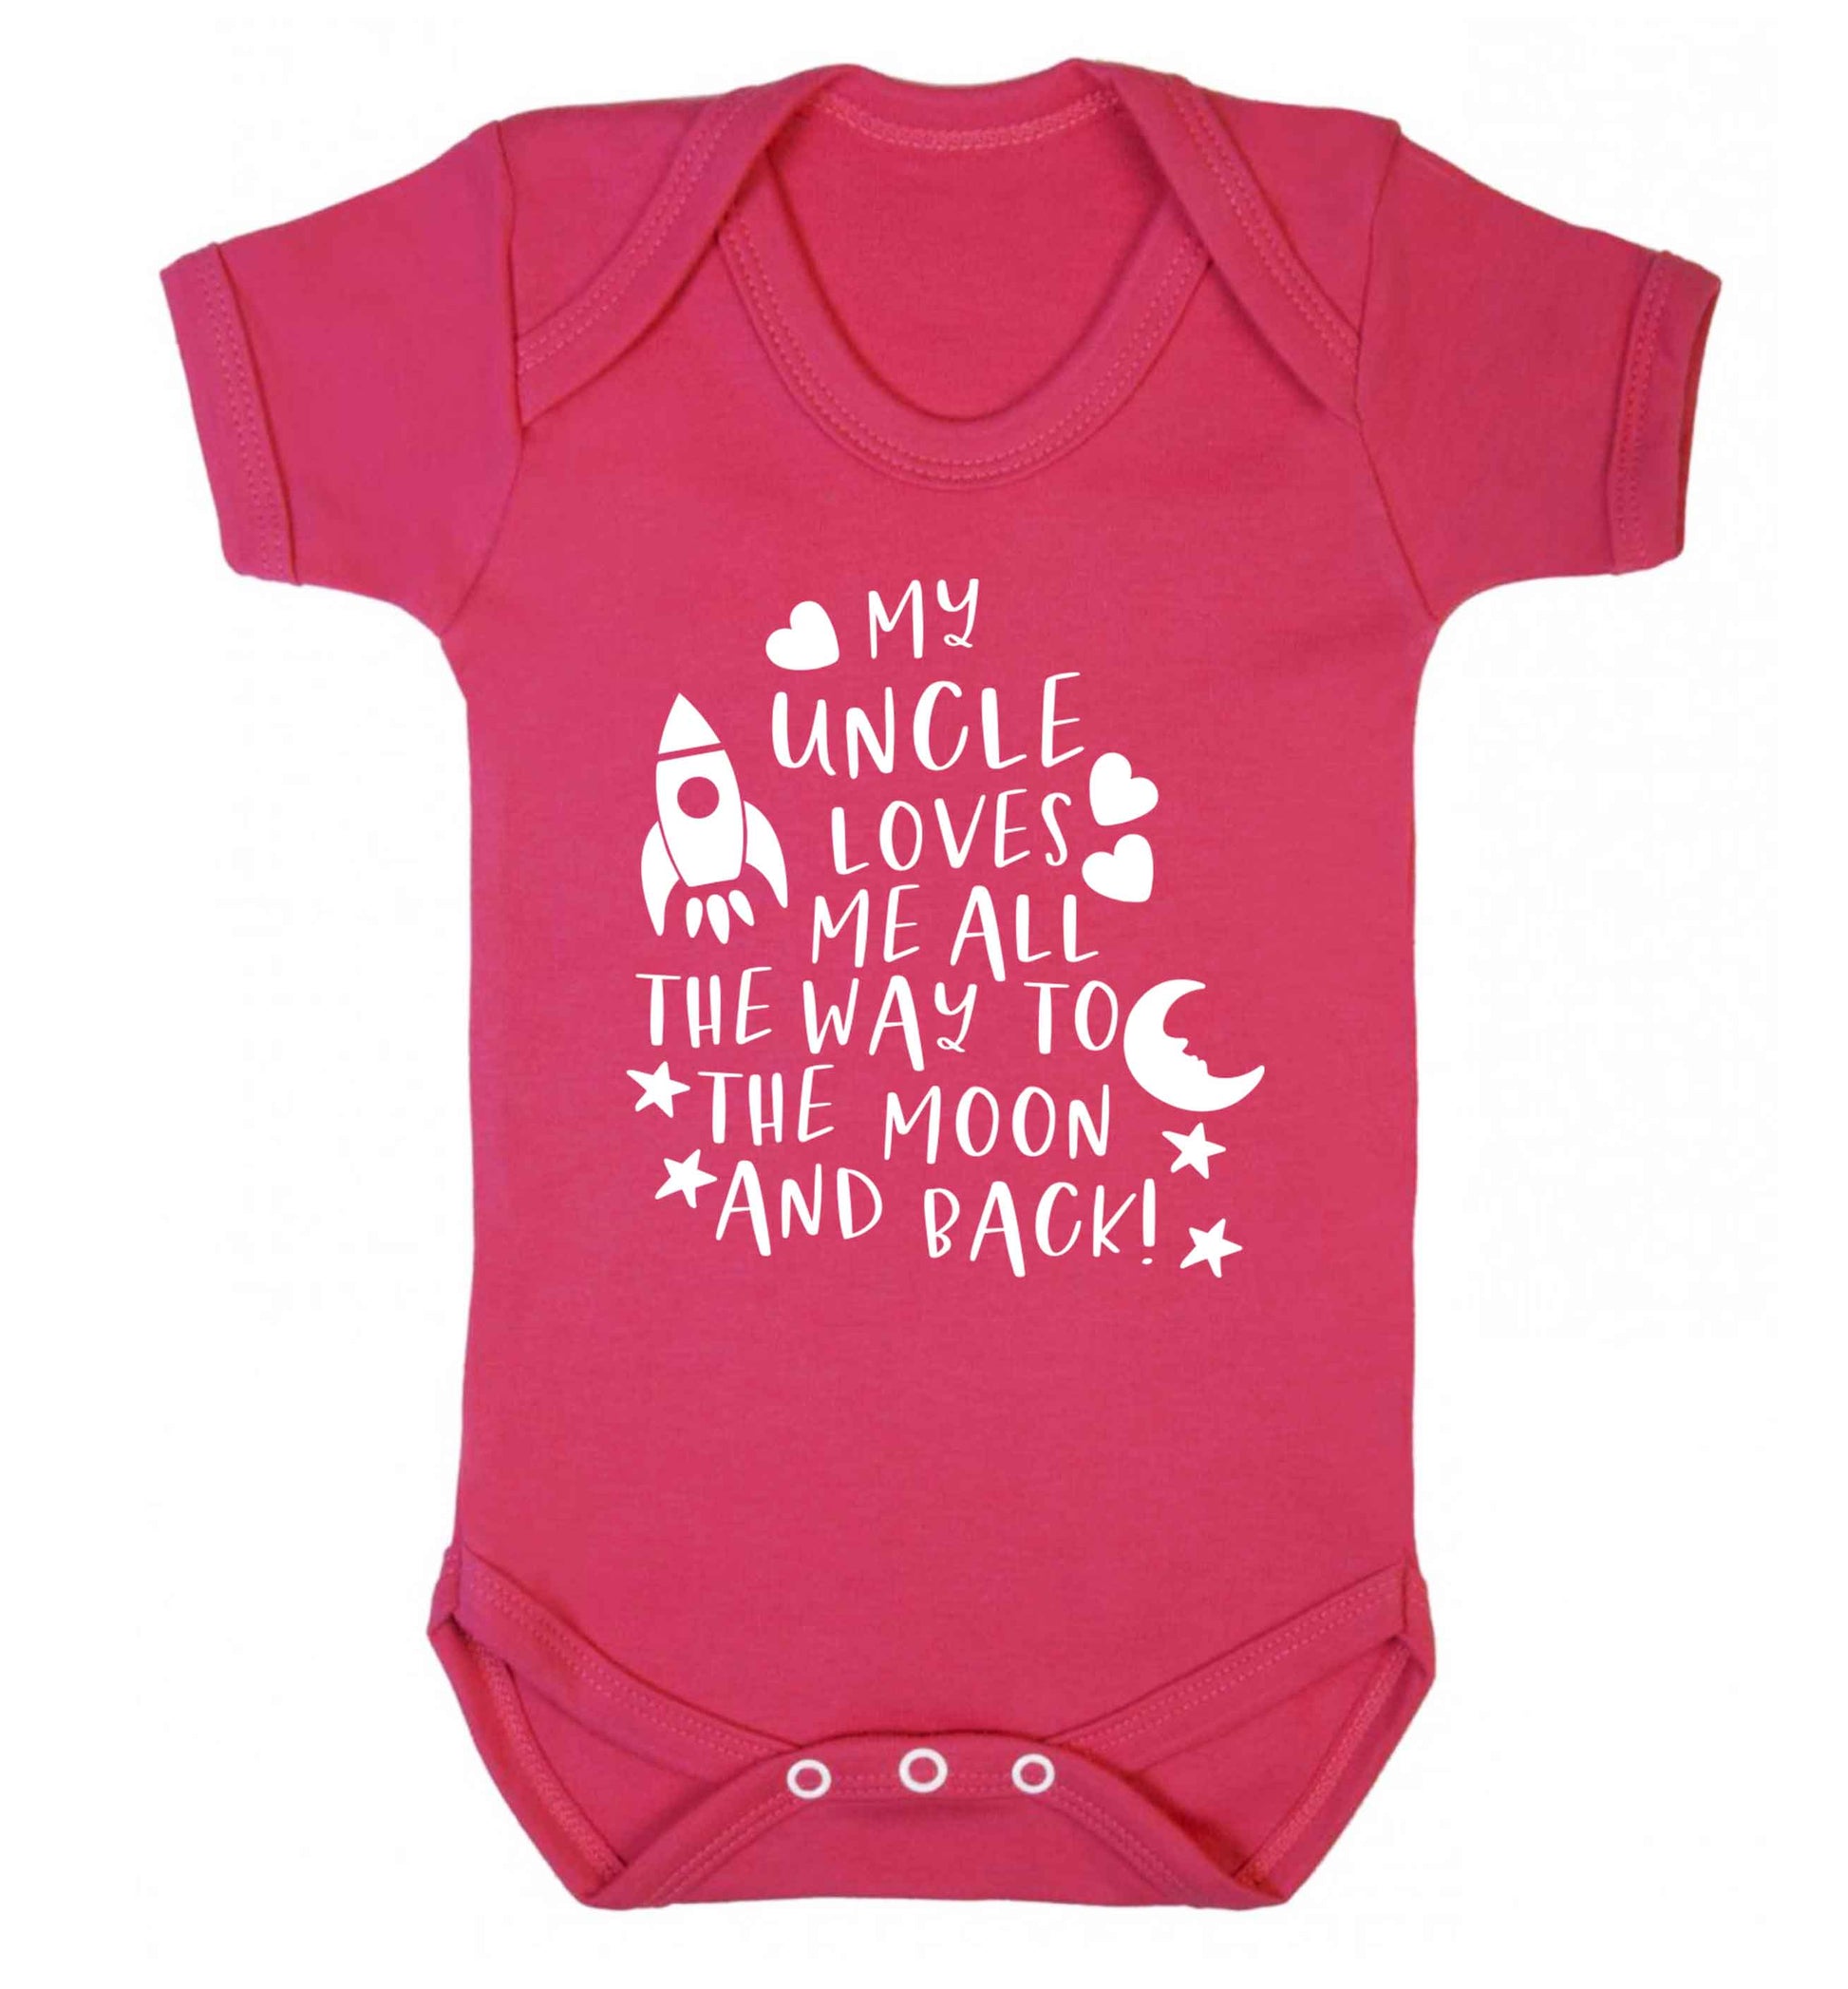 My uncle loves me all the way to the moon and back Baby Vest dark pink 18-24 months